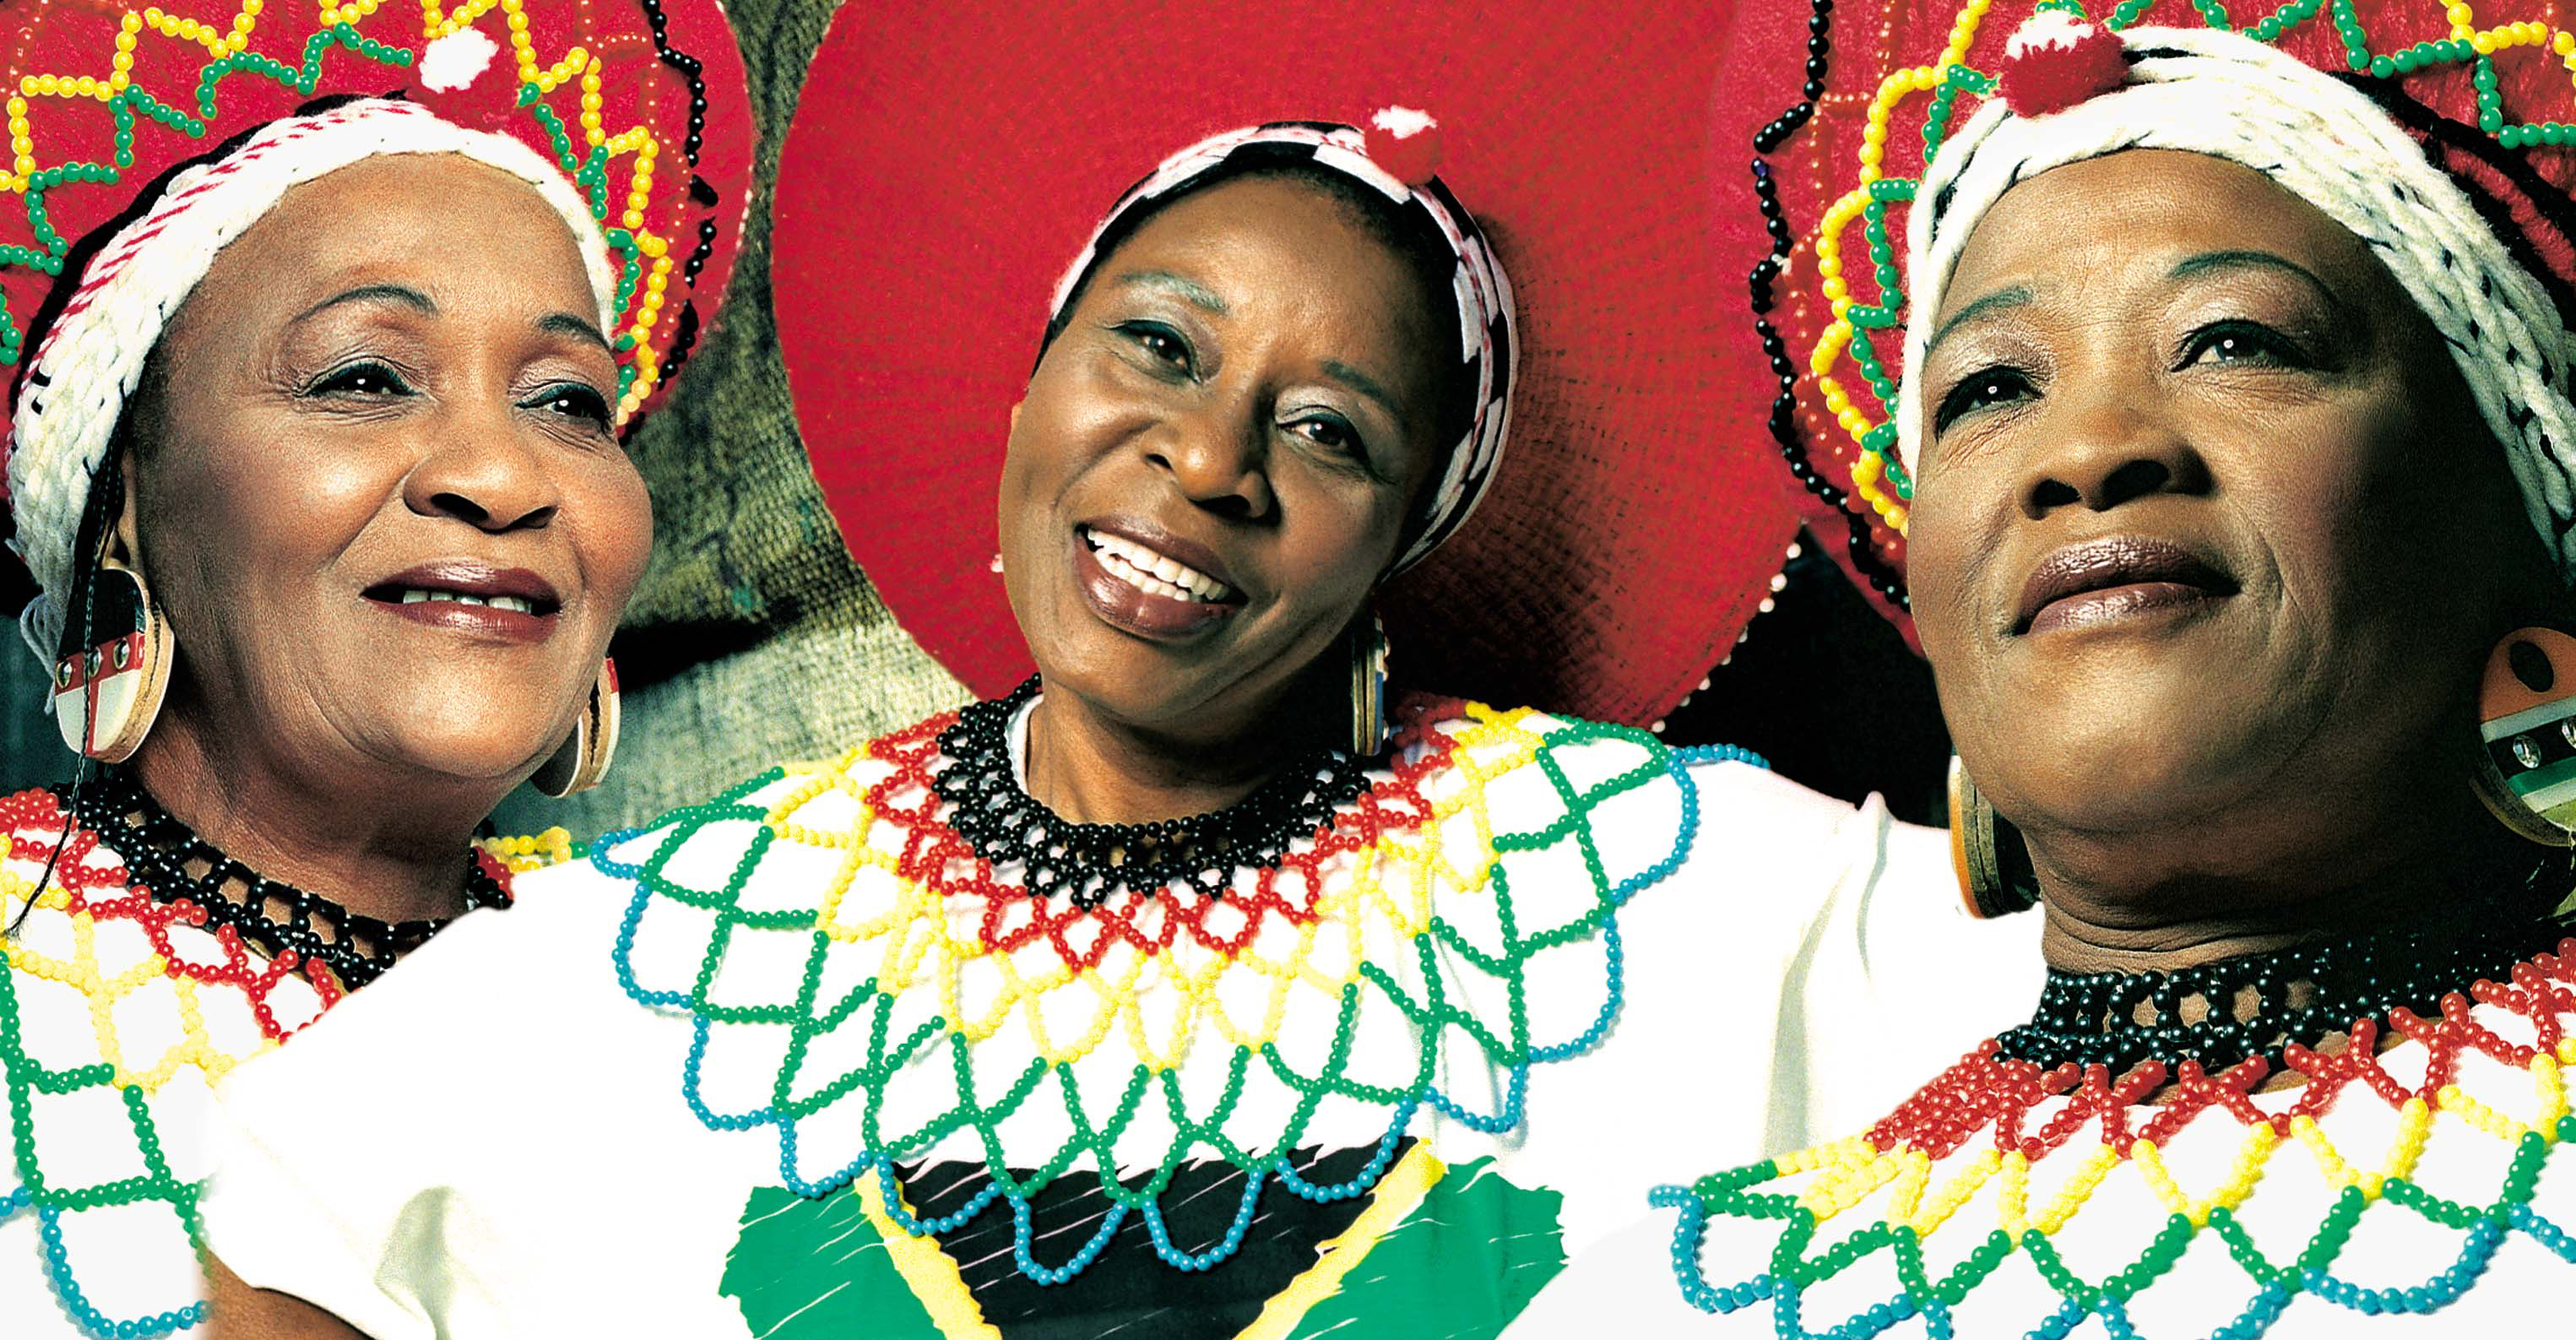 The Mahotella Queens - copyright Griot GmbH